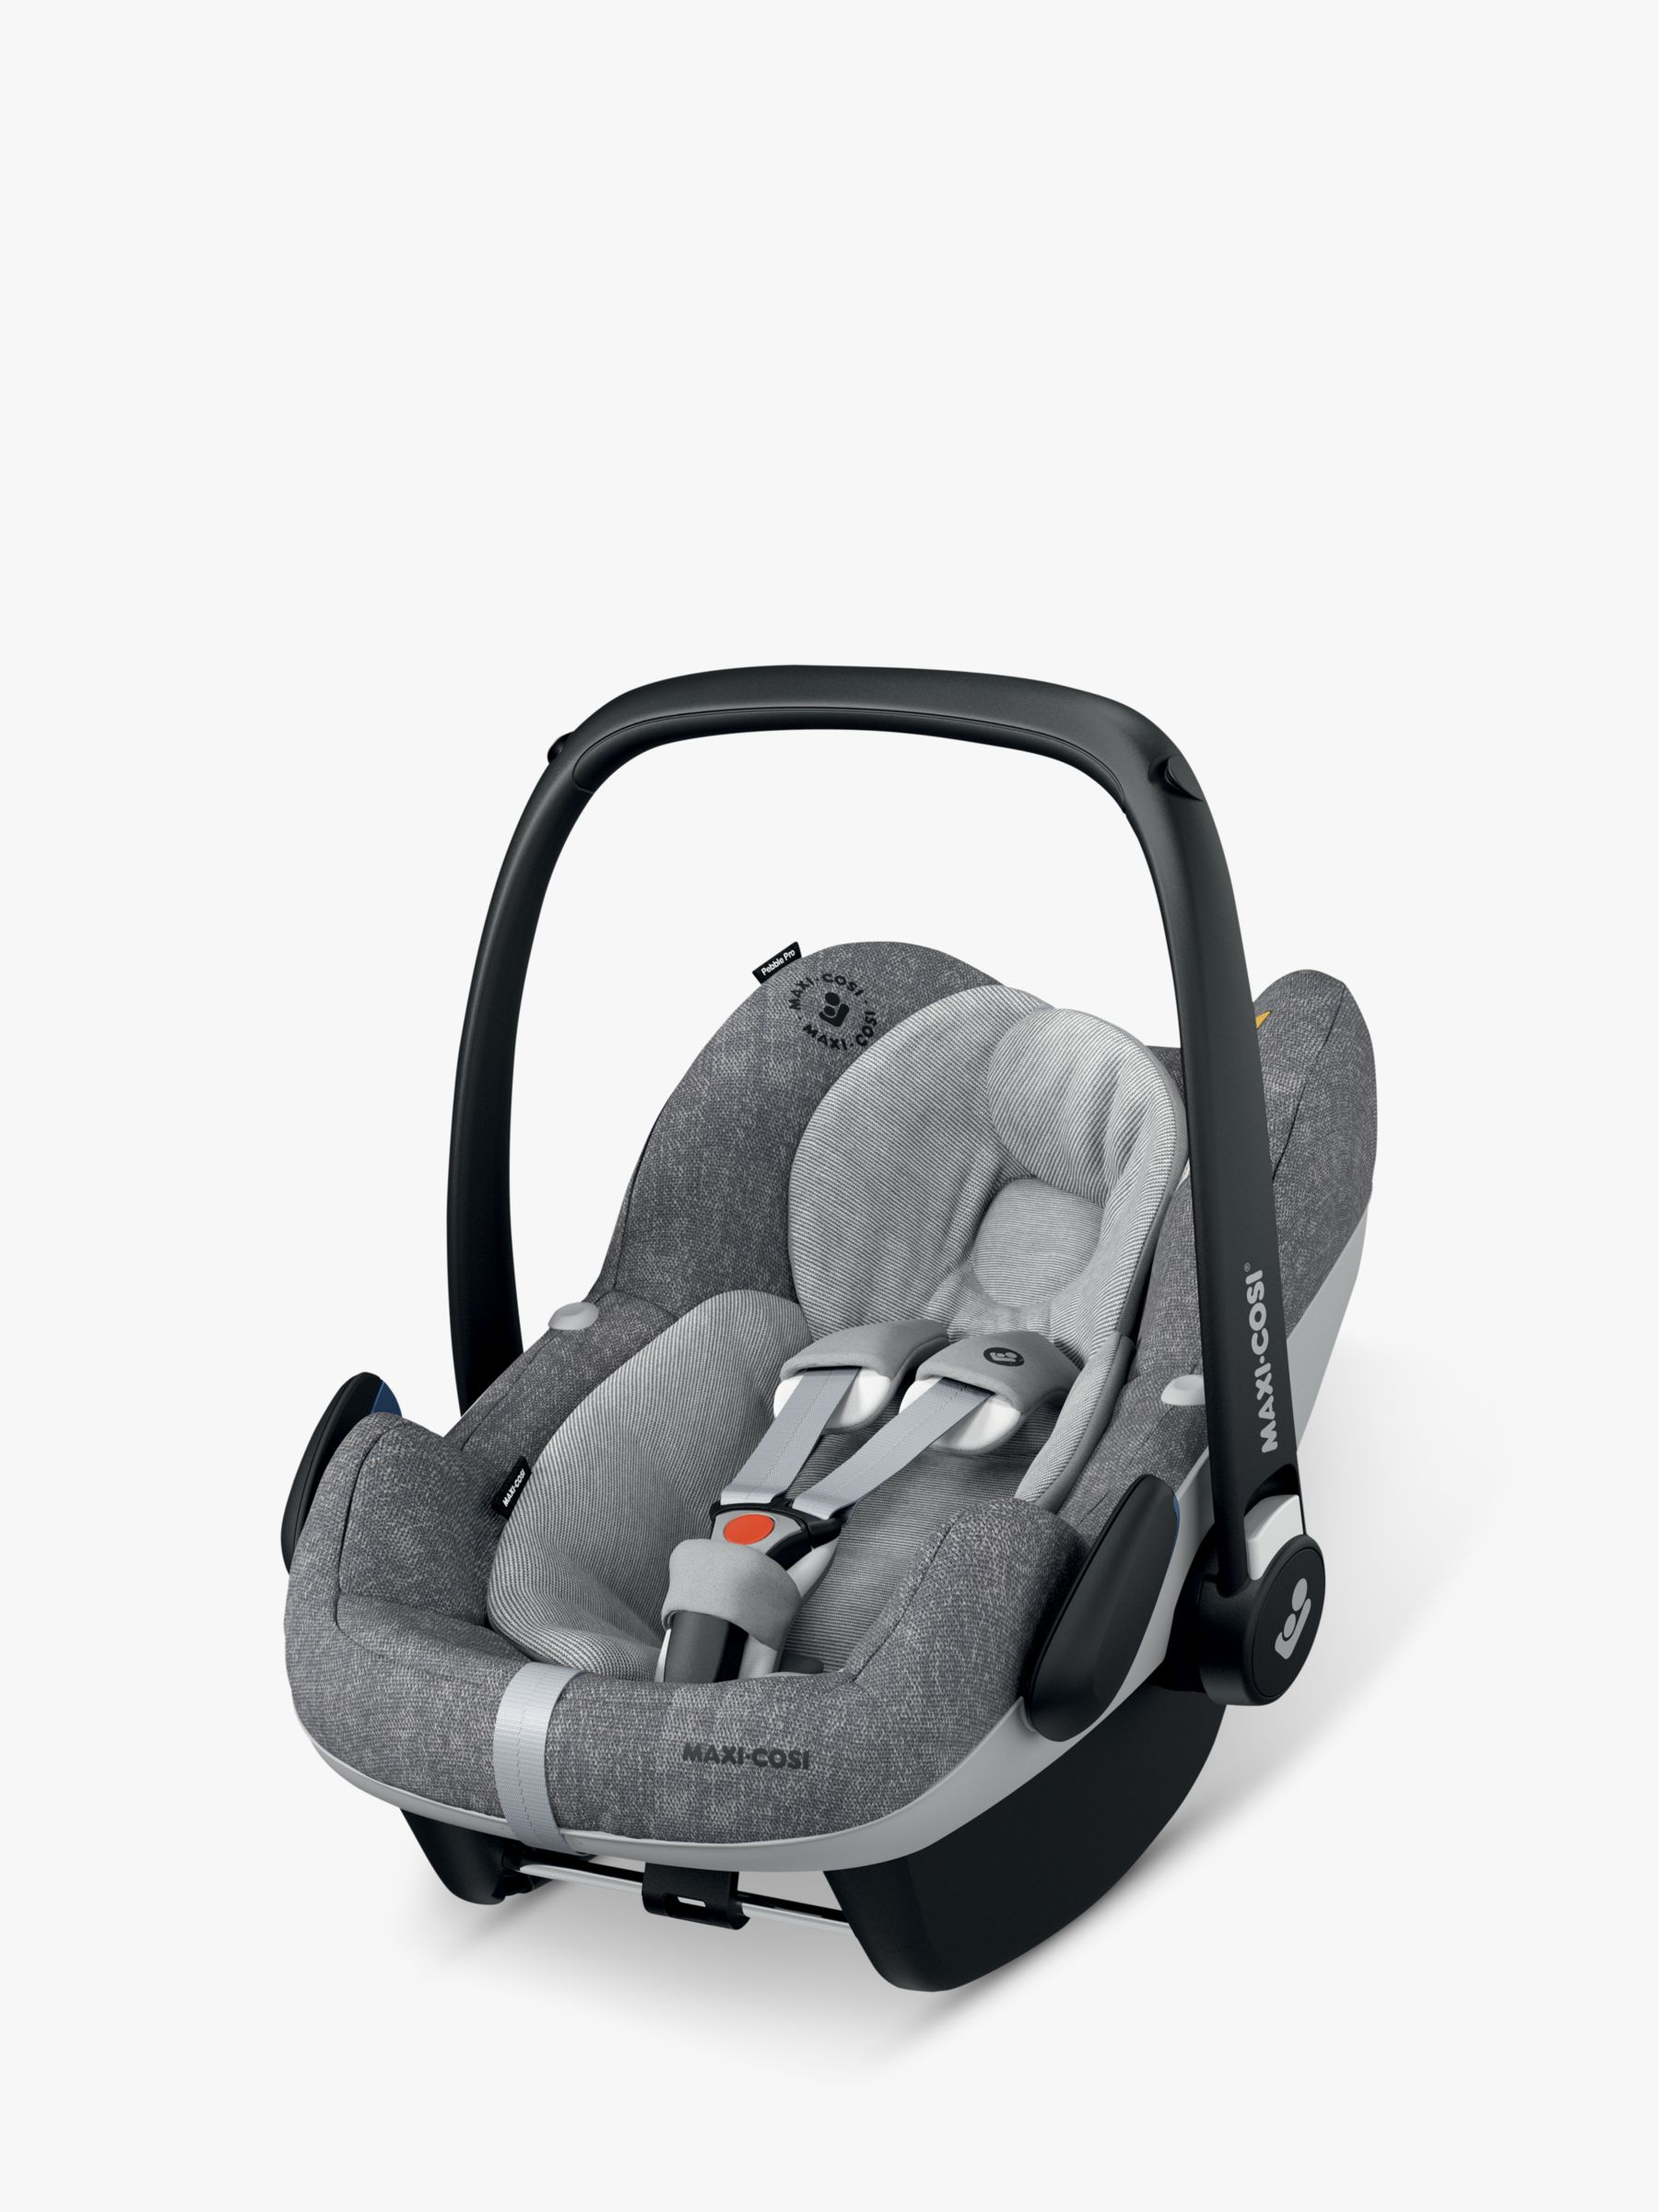 maxi cosi stroller and carseat set